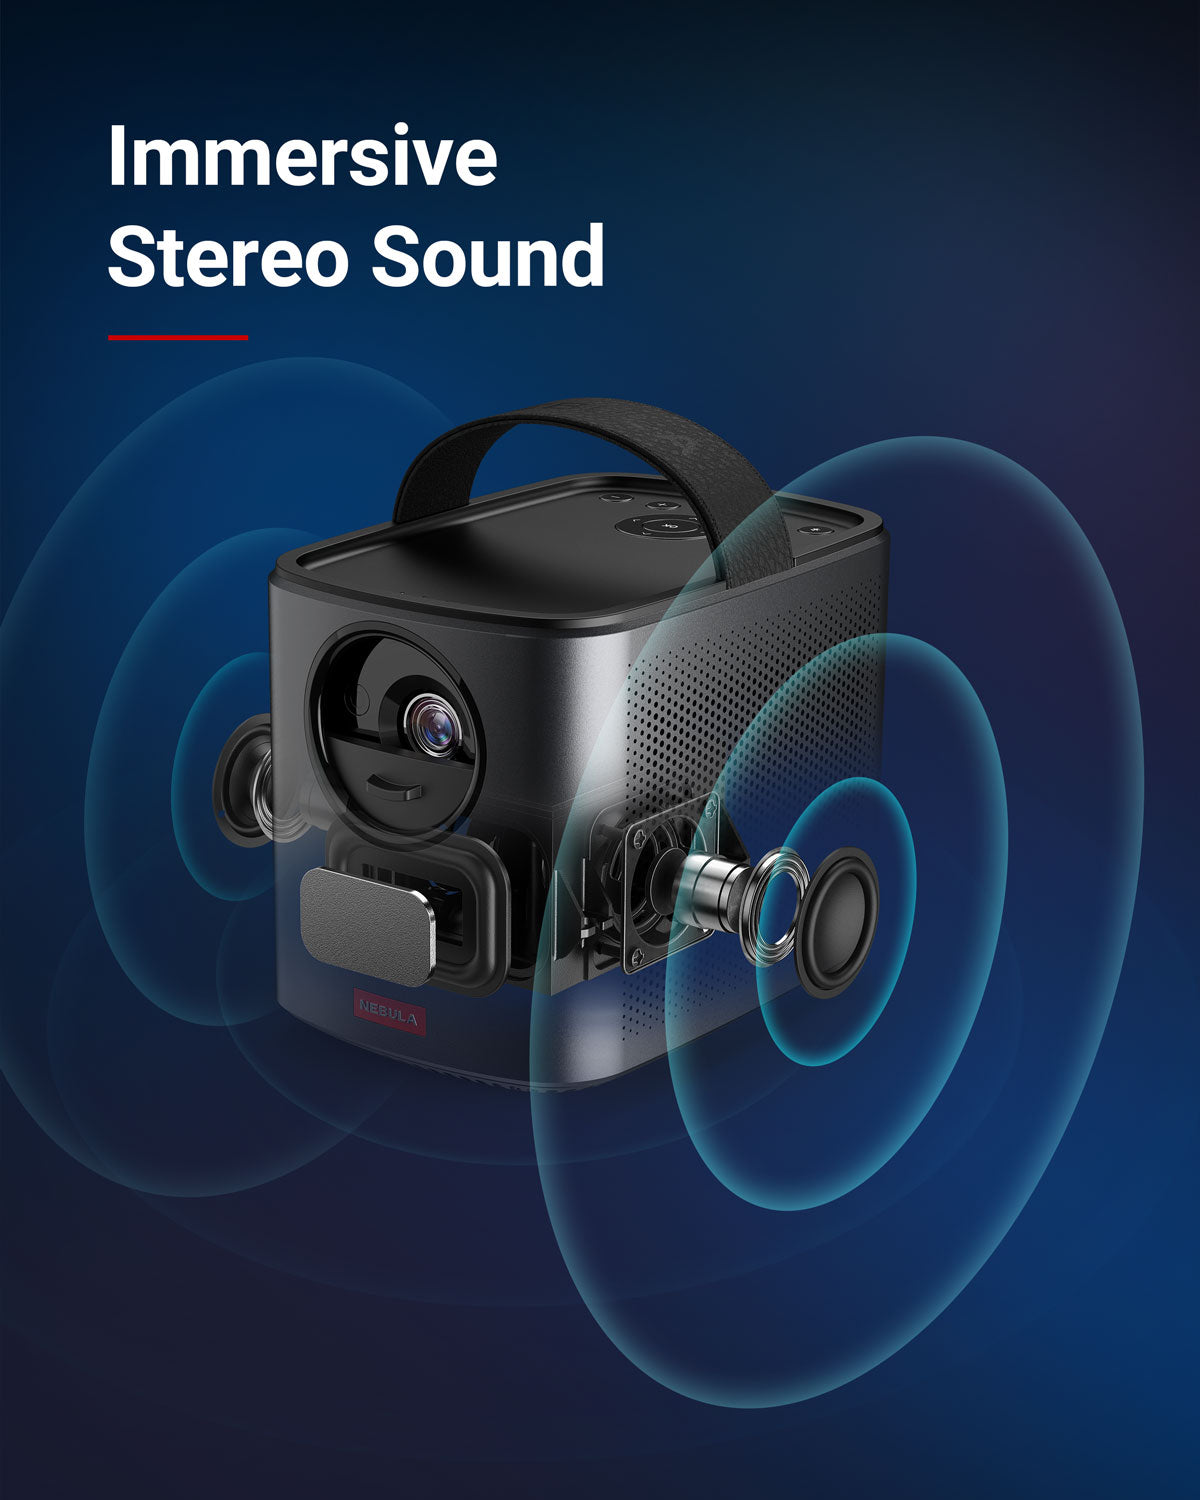 A Nebula Mars 2 Pro portable projector sits in a blue room while producing circular waves from its speakers.